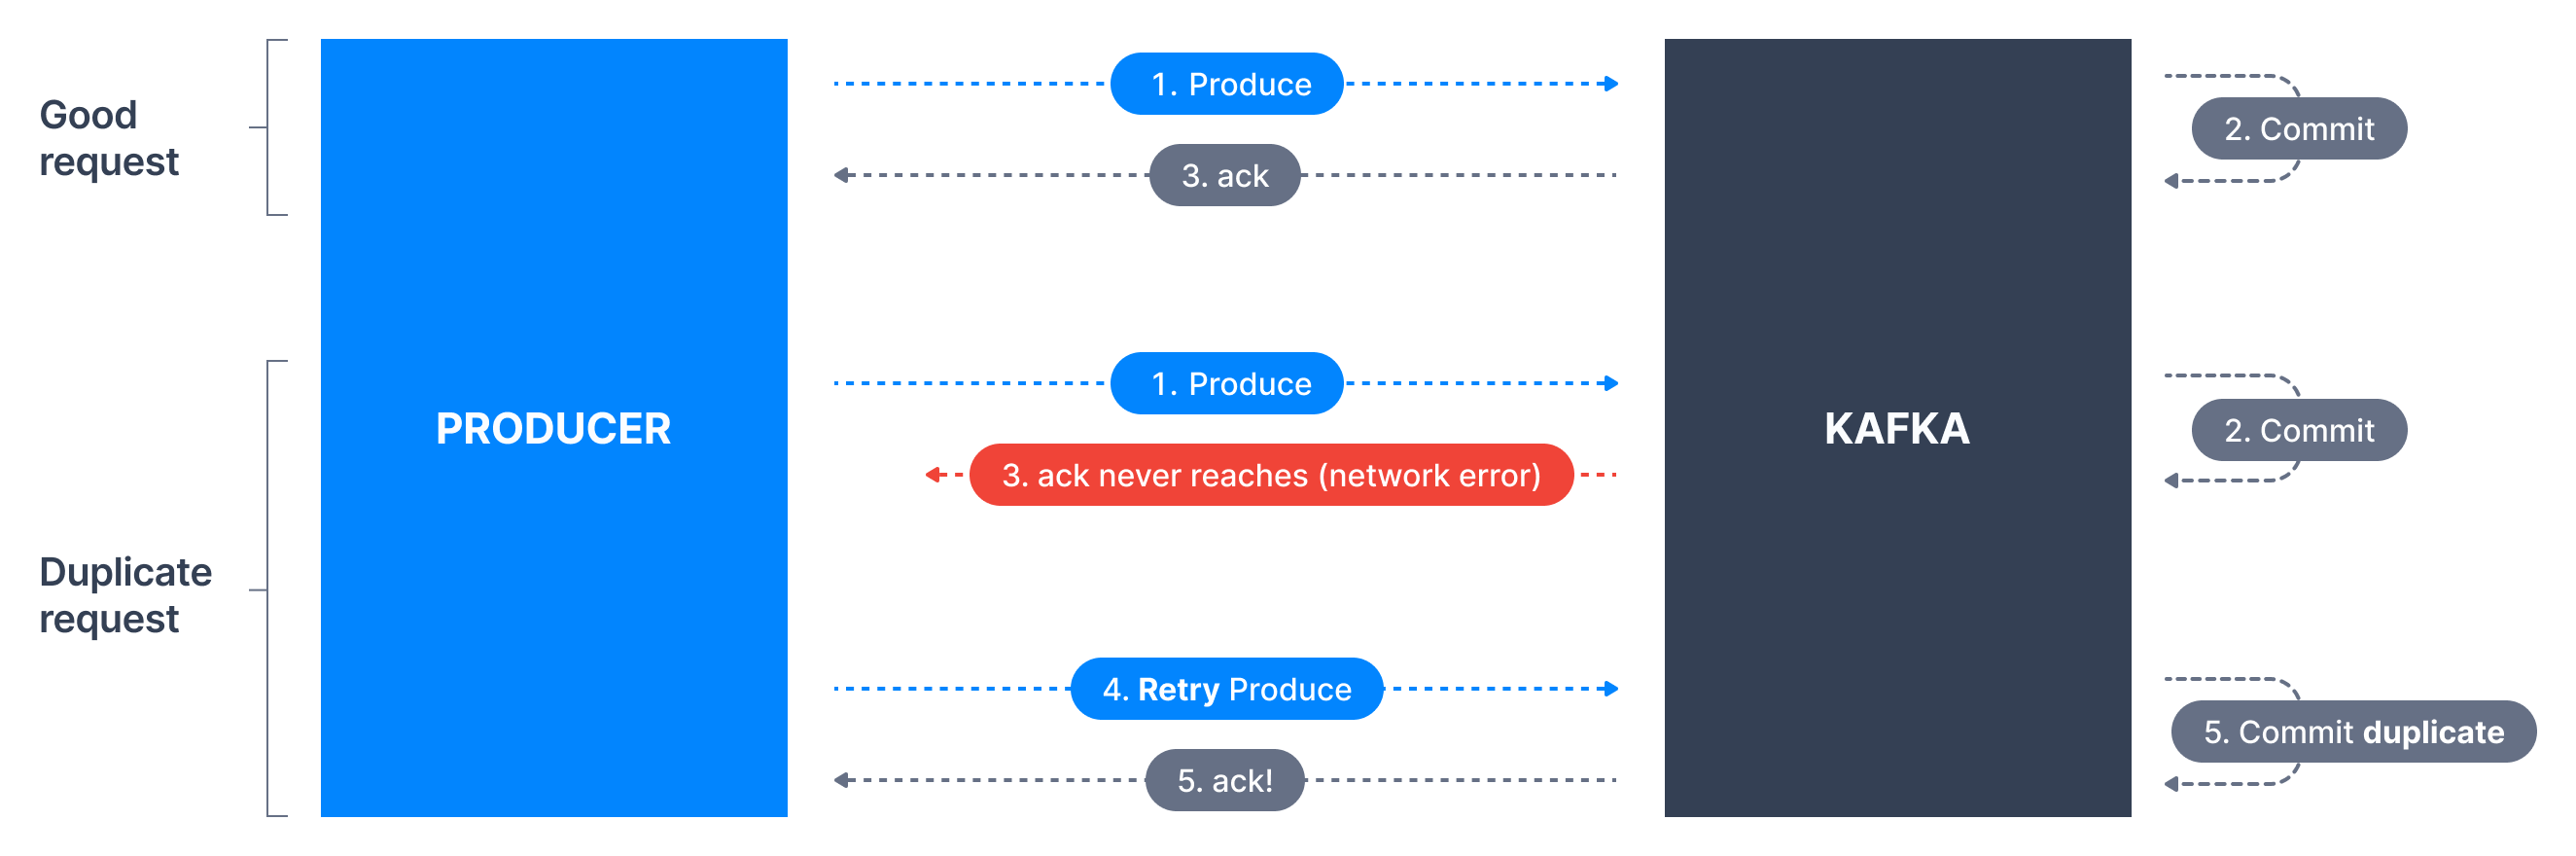 Diagram showing how producer retries and network errors can lead to message duplication in Apache Kafka.